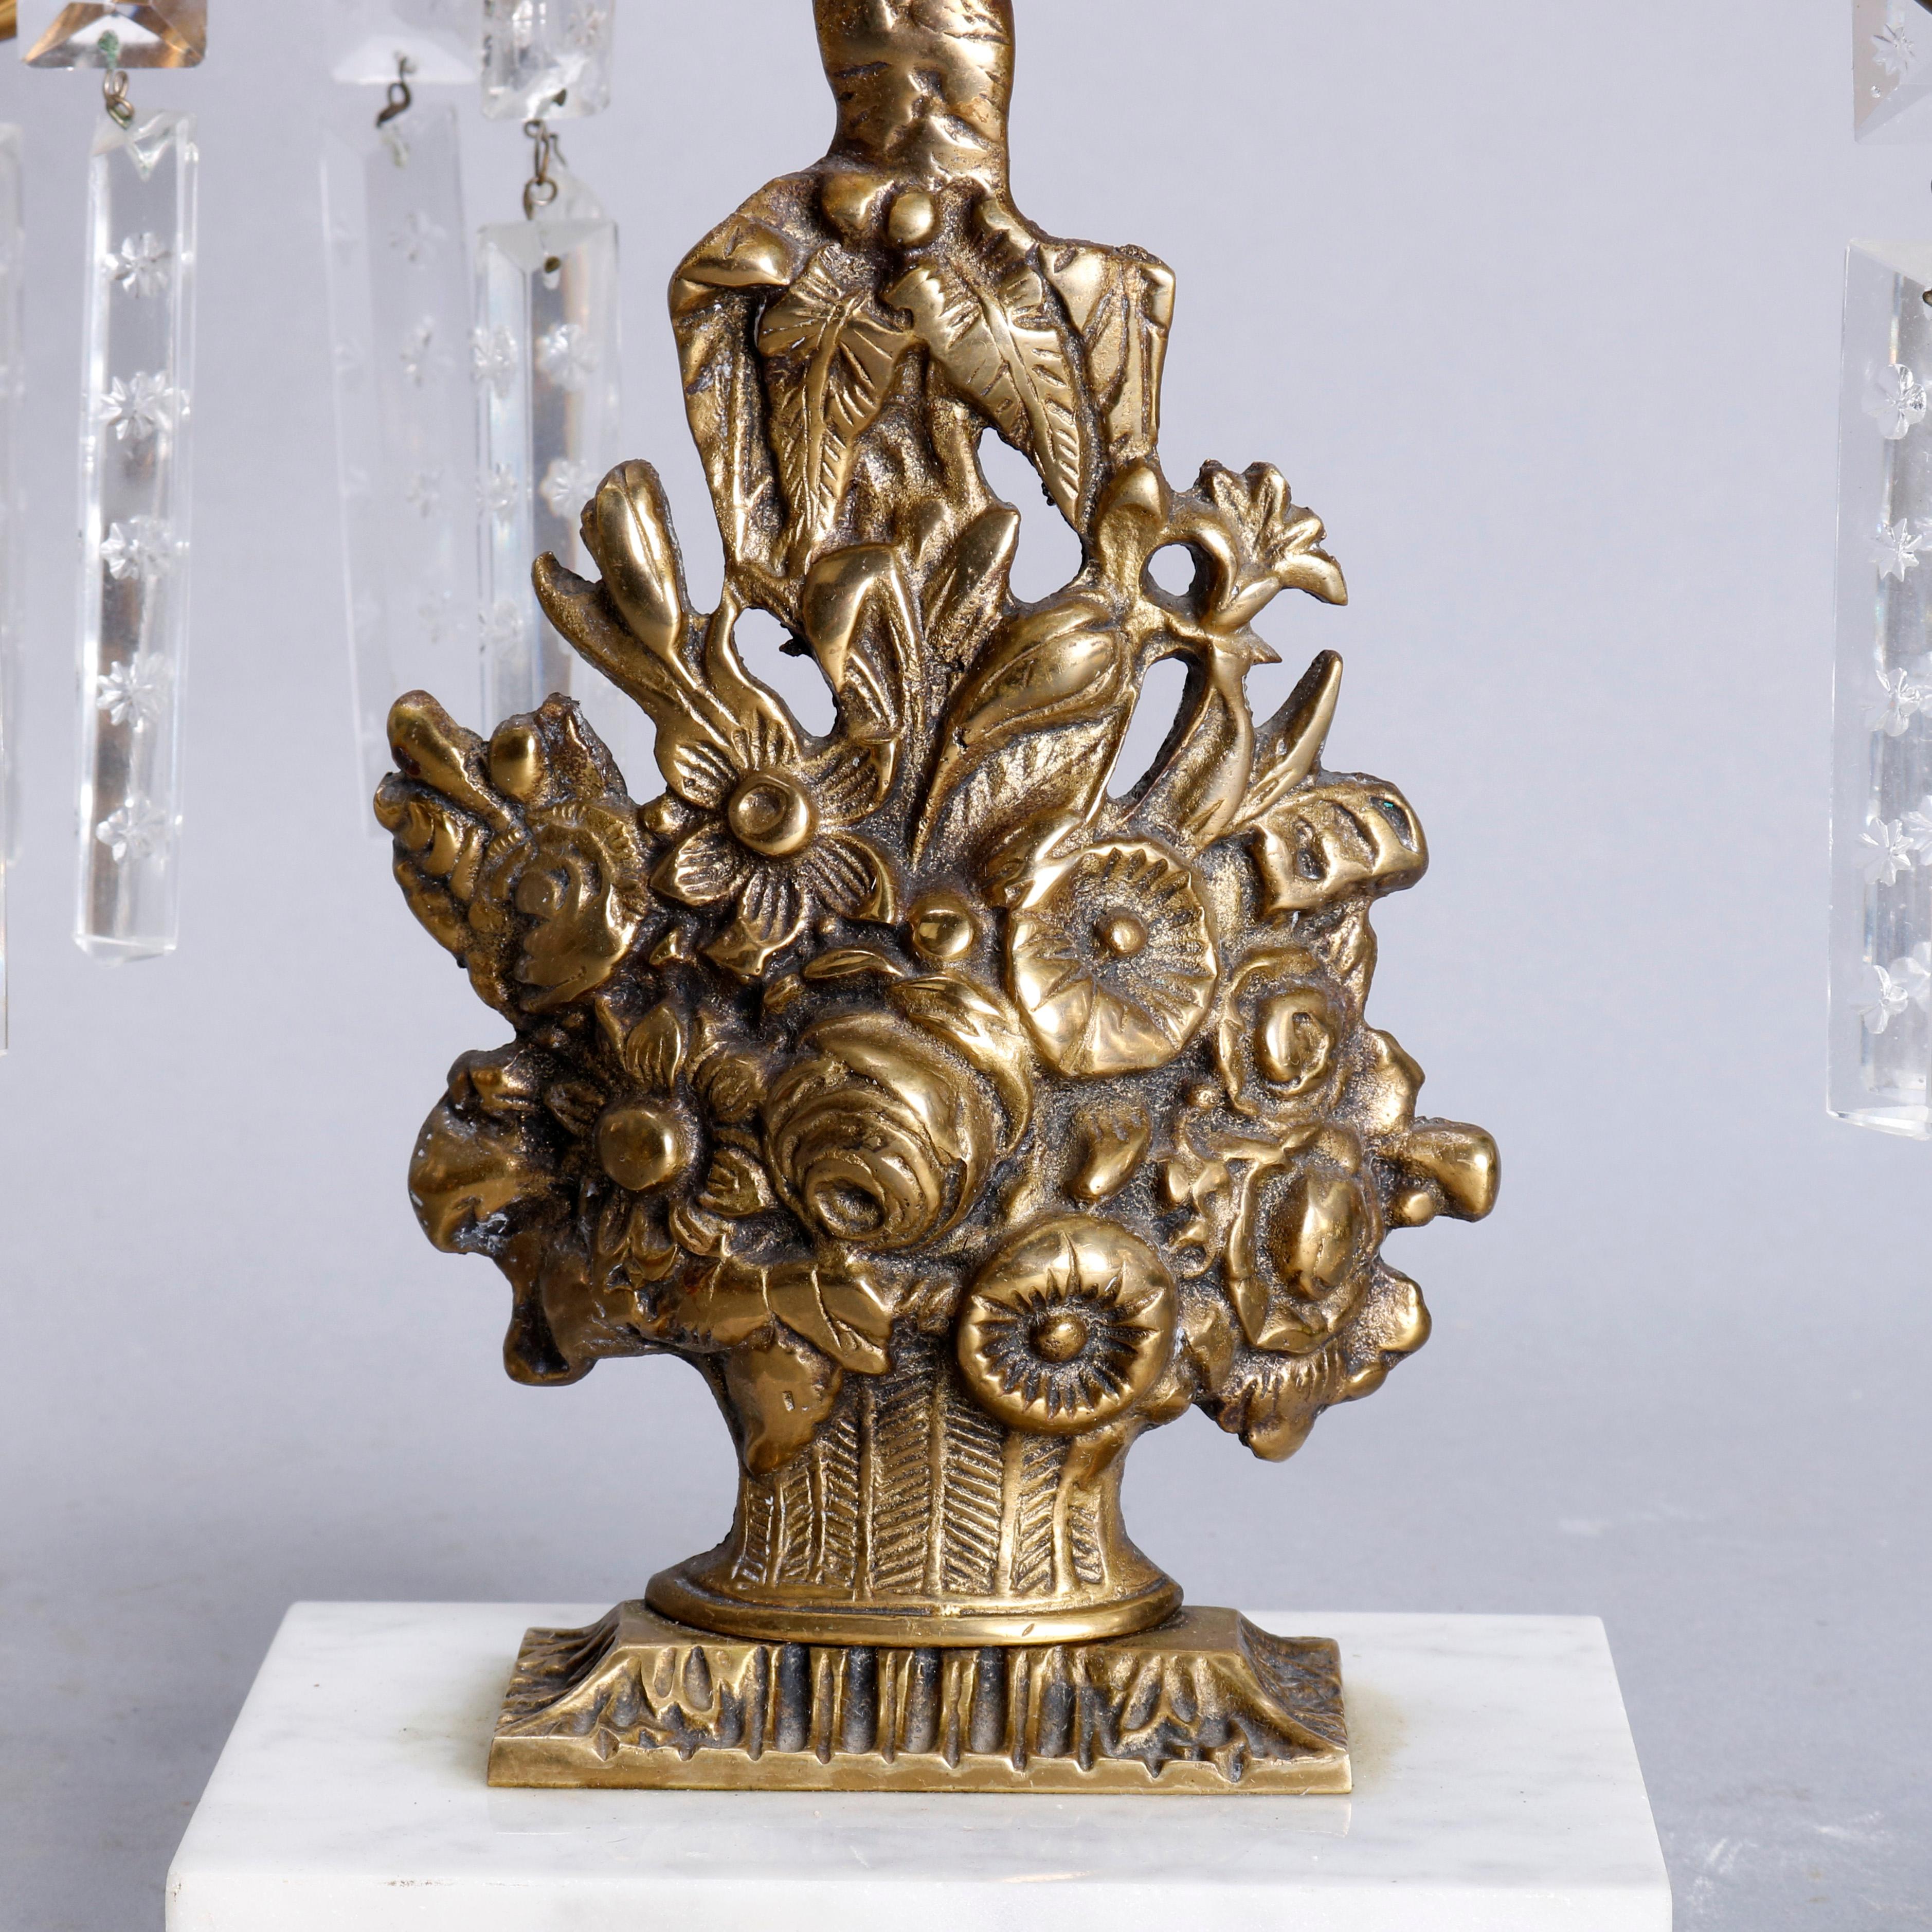 An antique girandole candelabra set offers cast brass Panier de Fleurs, basket of flowers, having three foliate form arms terminating in candle sockets with hanging crystals and seated on marble bases, circa 1880

***DELIVERY NOTICE – Due to